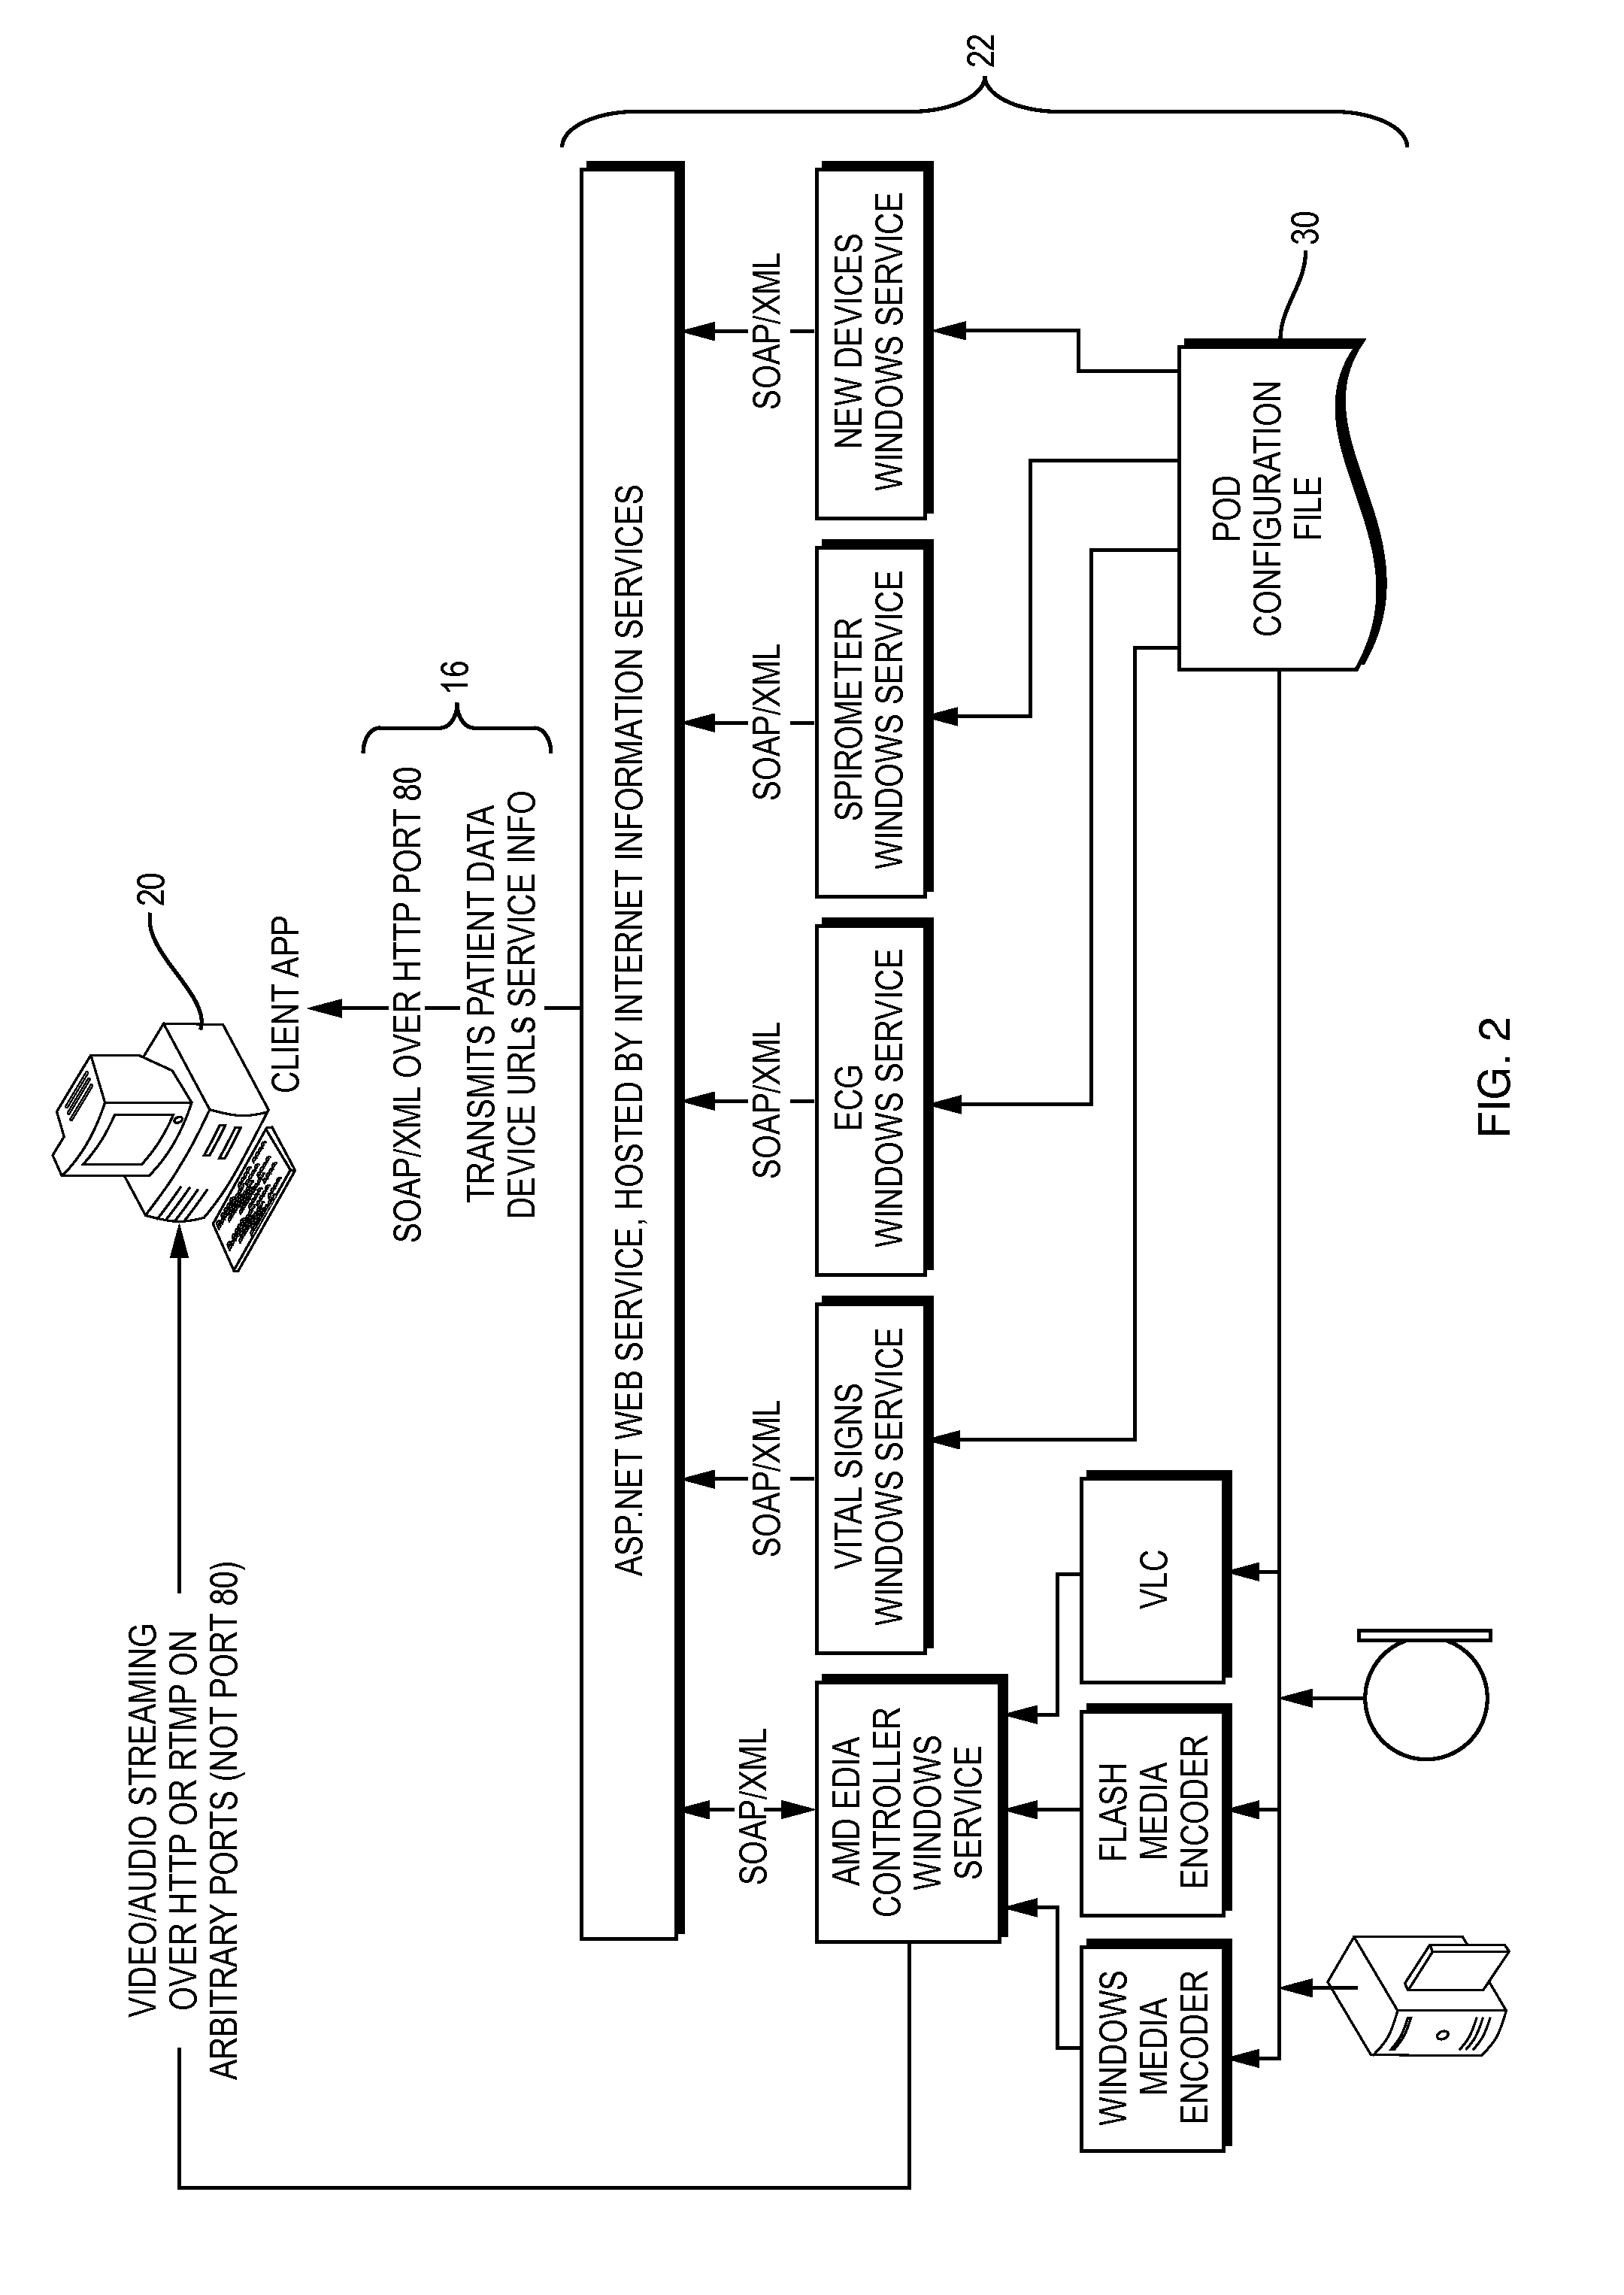 Remote healthcare data-gathering and viewing system and method